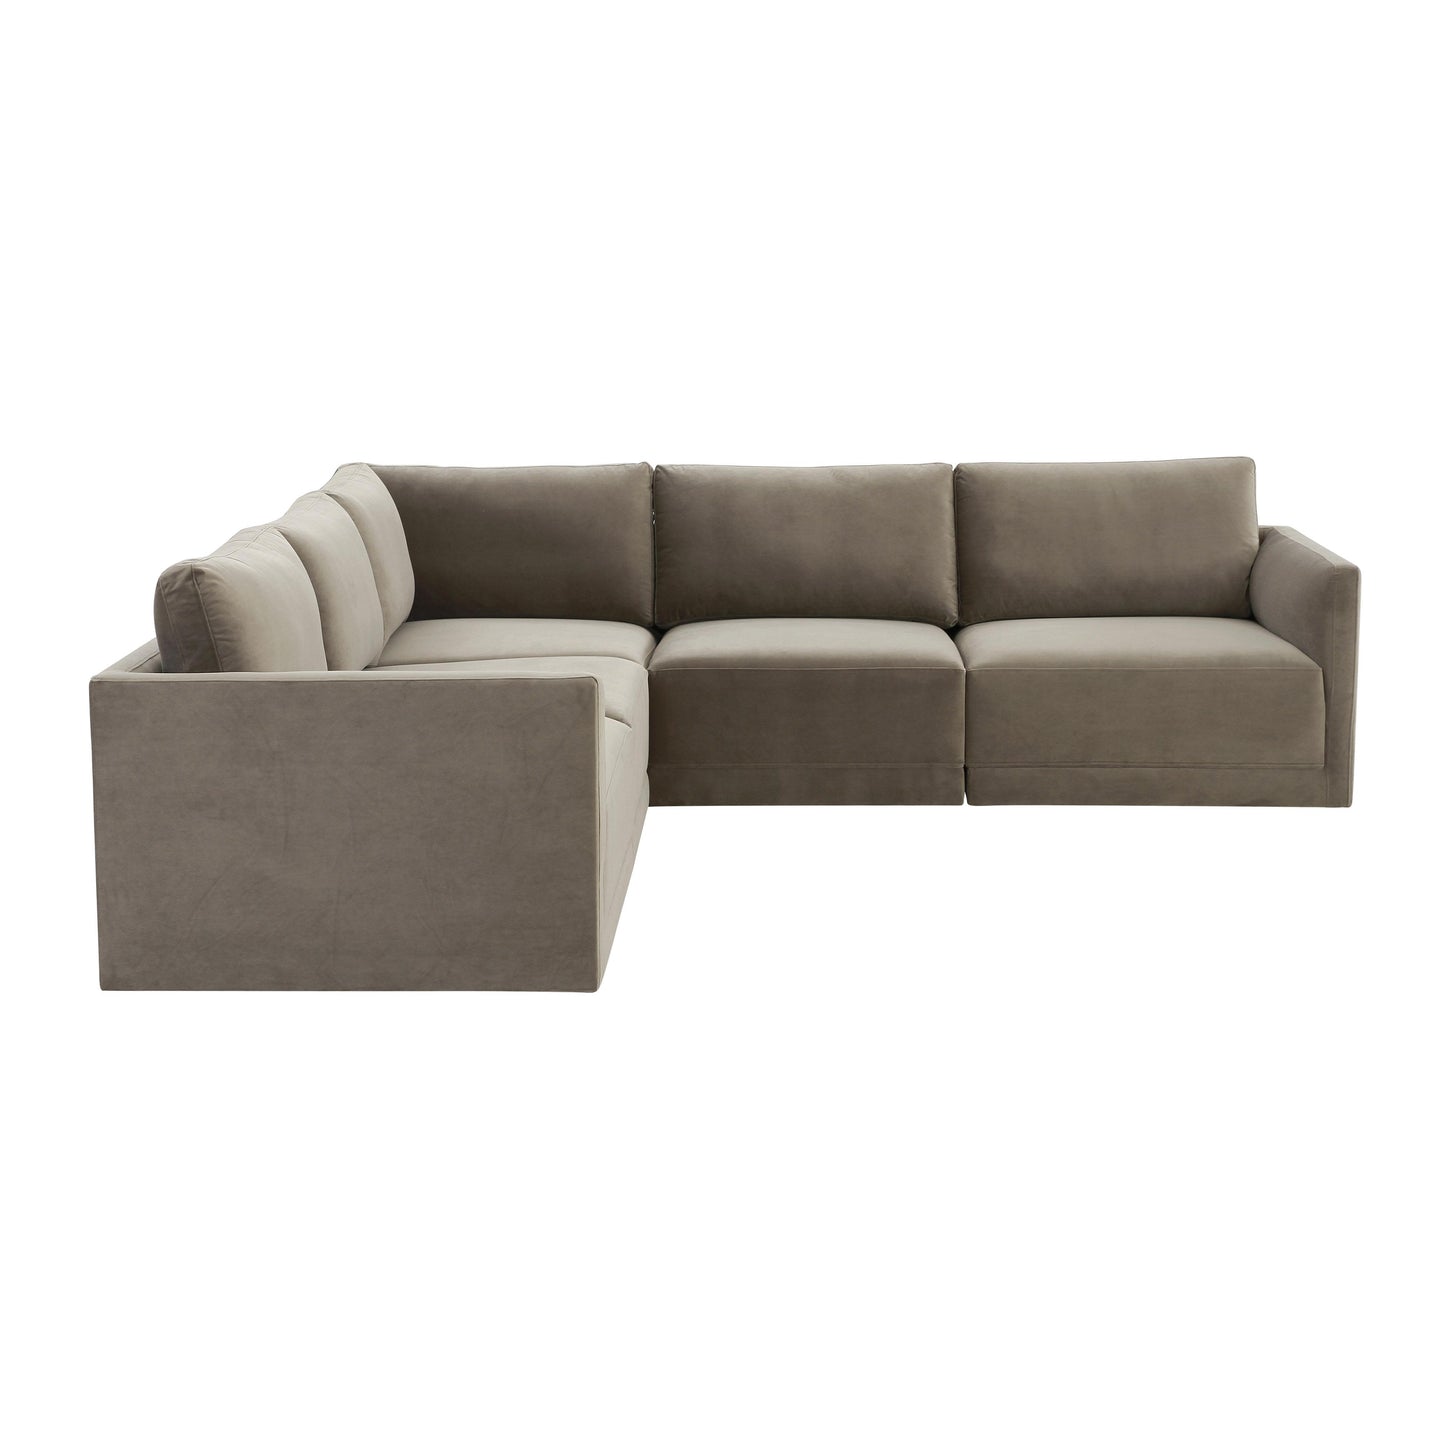 Tov Furniture Willow Taupe Modular L Sectional